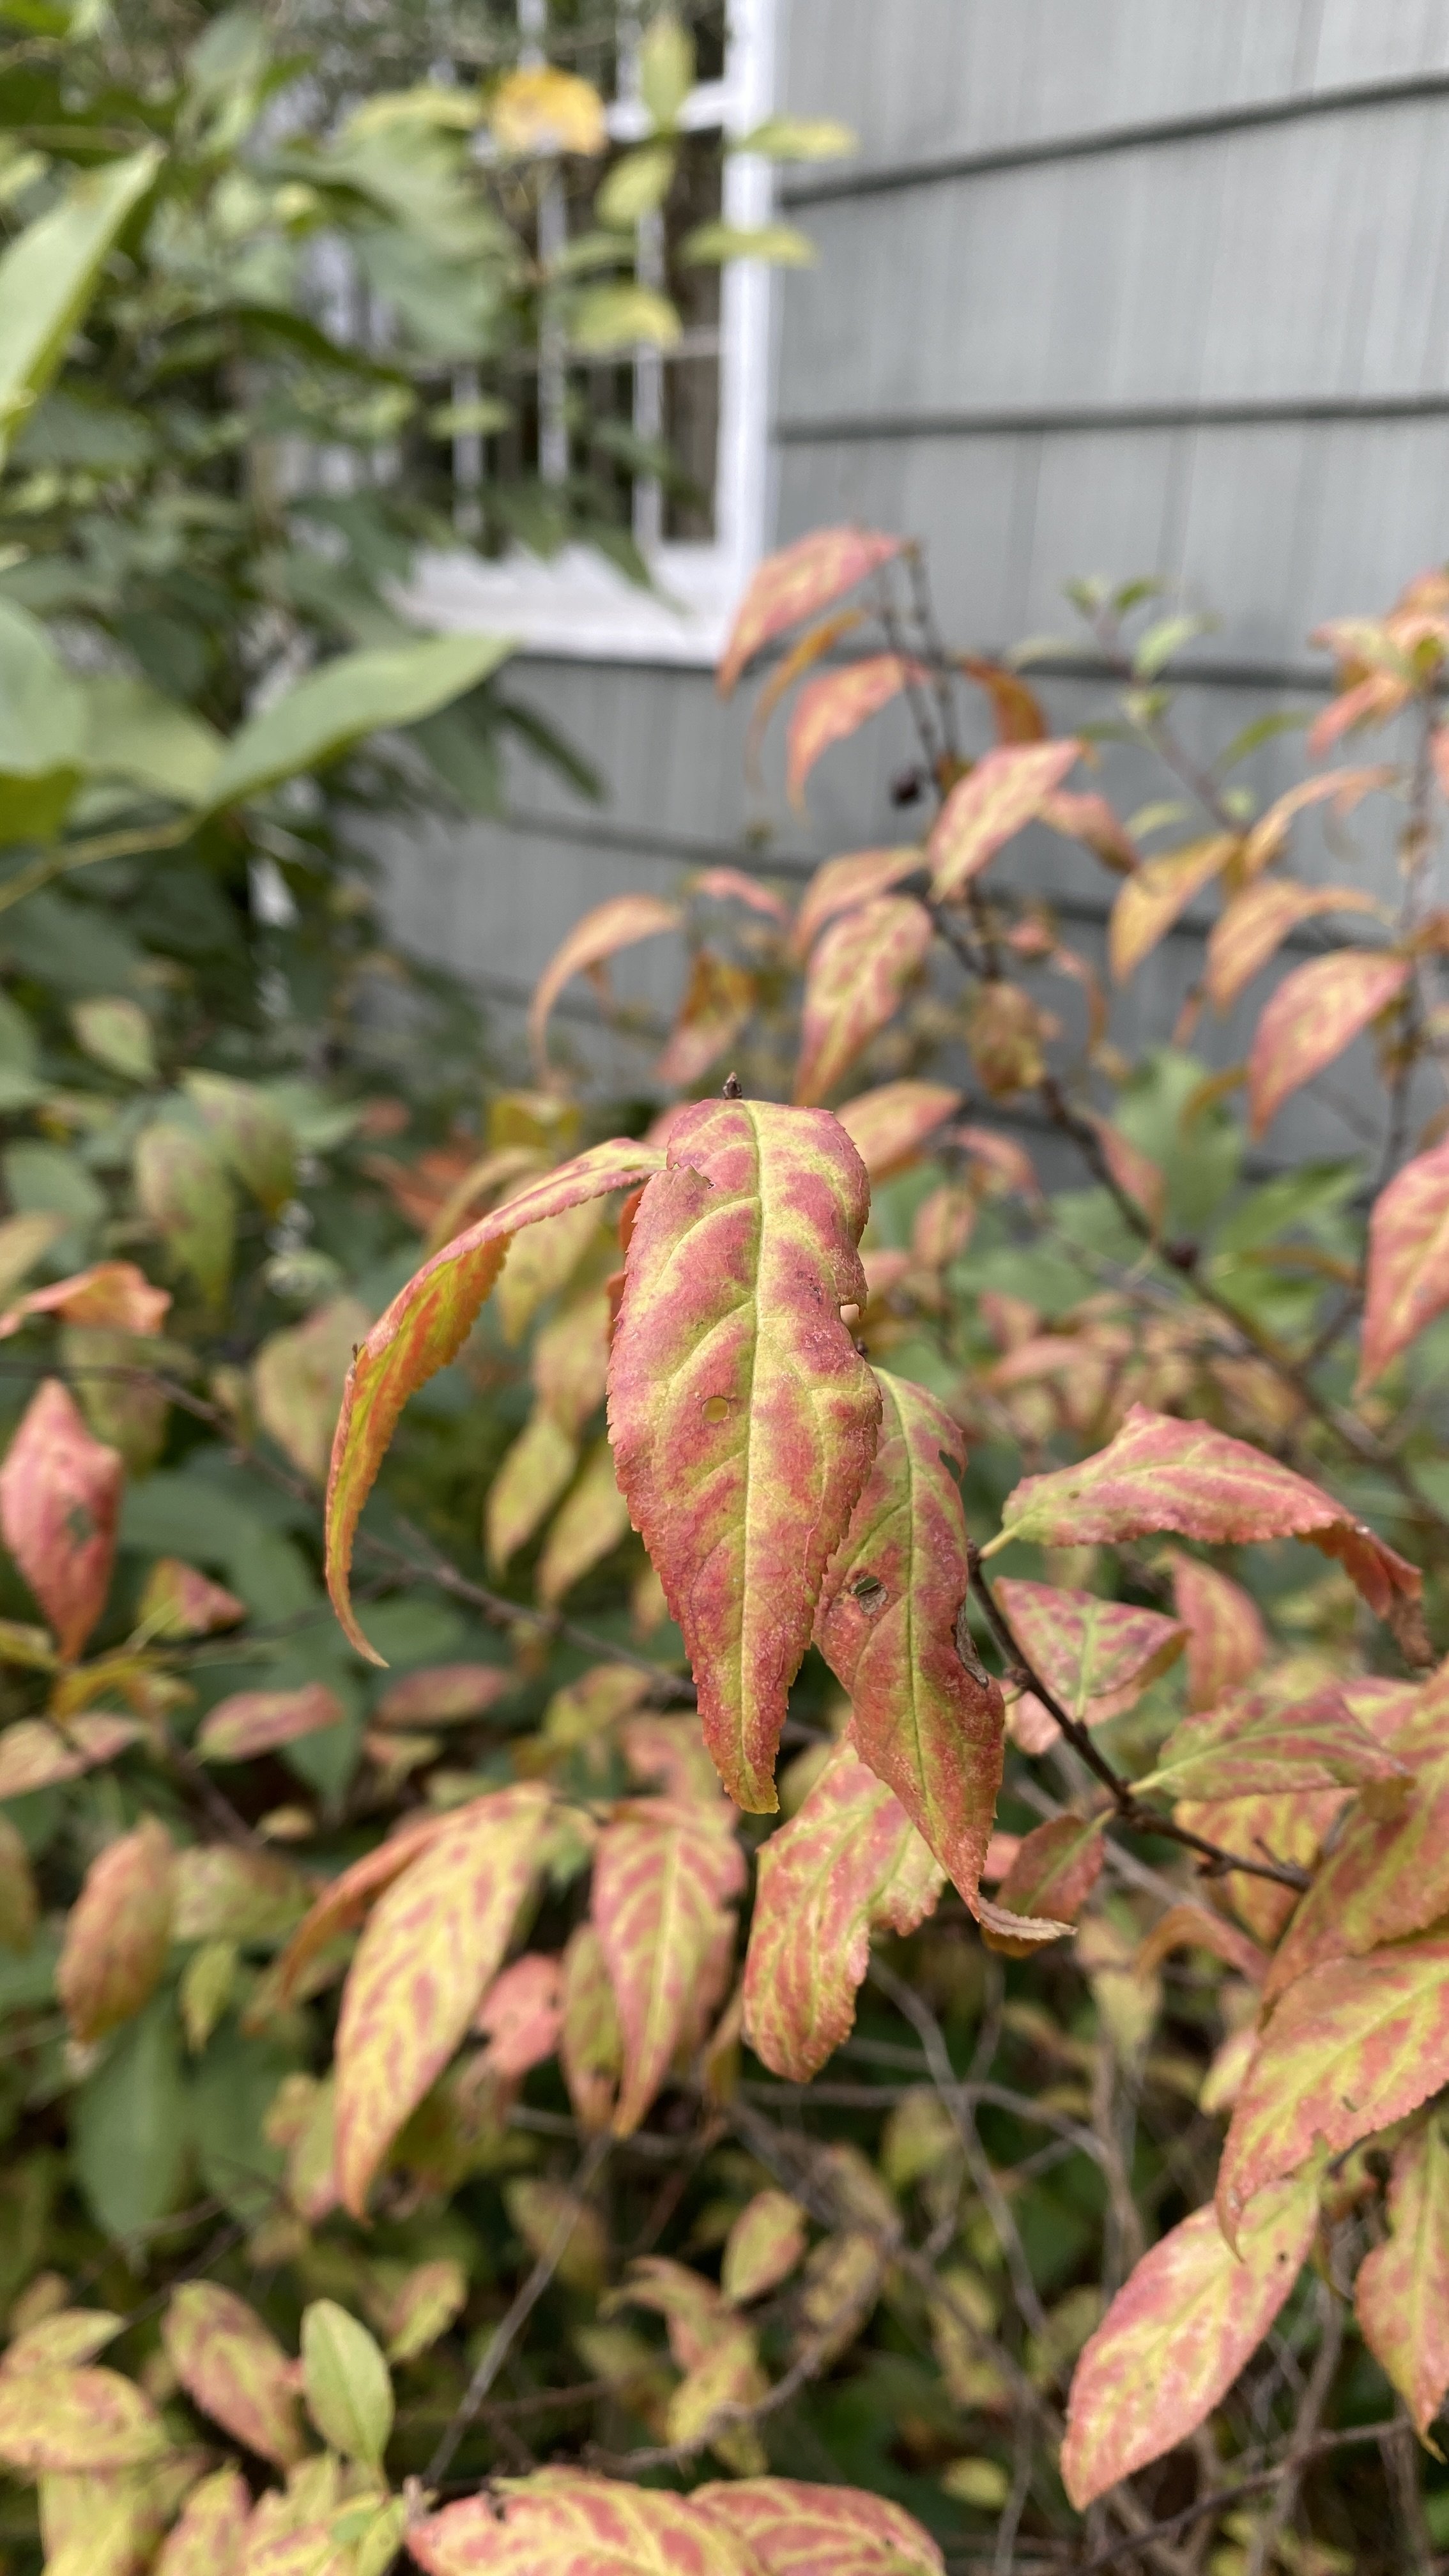  The coloration of the leaves of the  Prunus humilis  (dwarf bush cherry) is striking.  This was given to Elizabeth in October of 1957 by Caroline Dormon. 